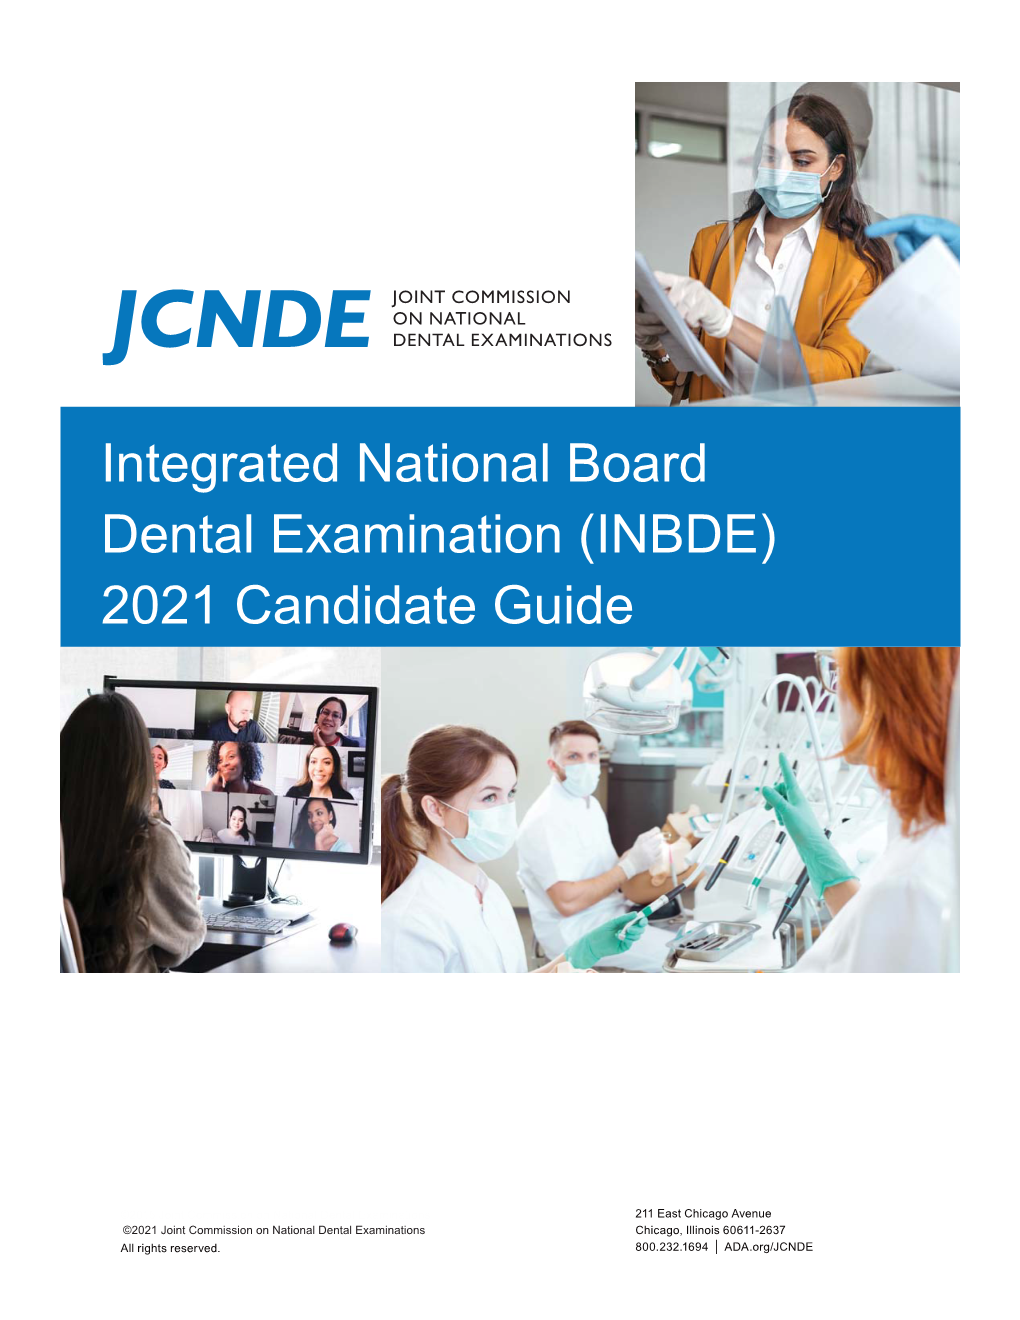 INBDE) 2021 Candidate Guide